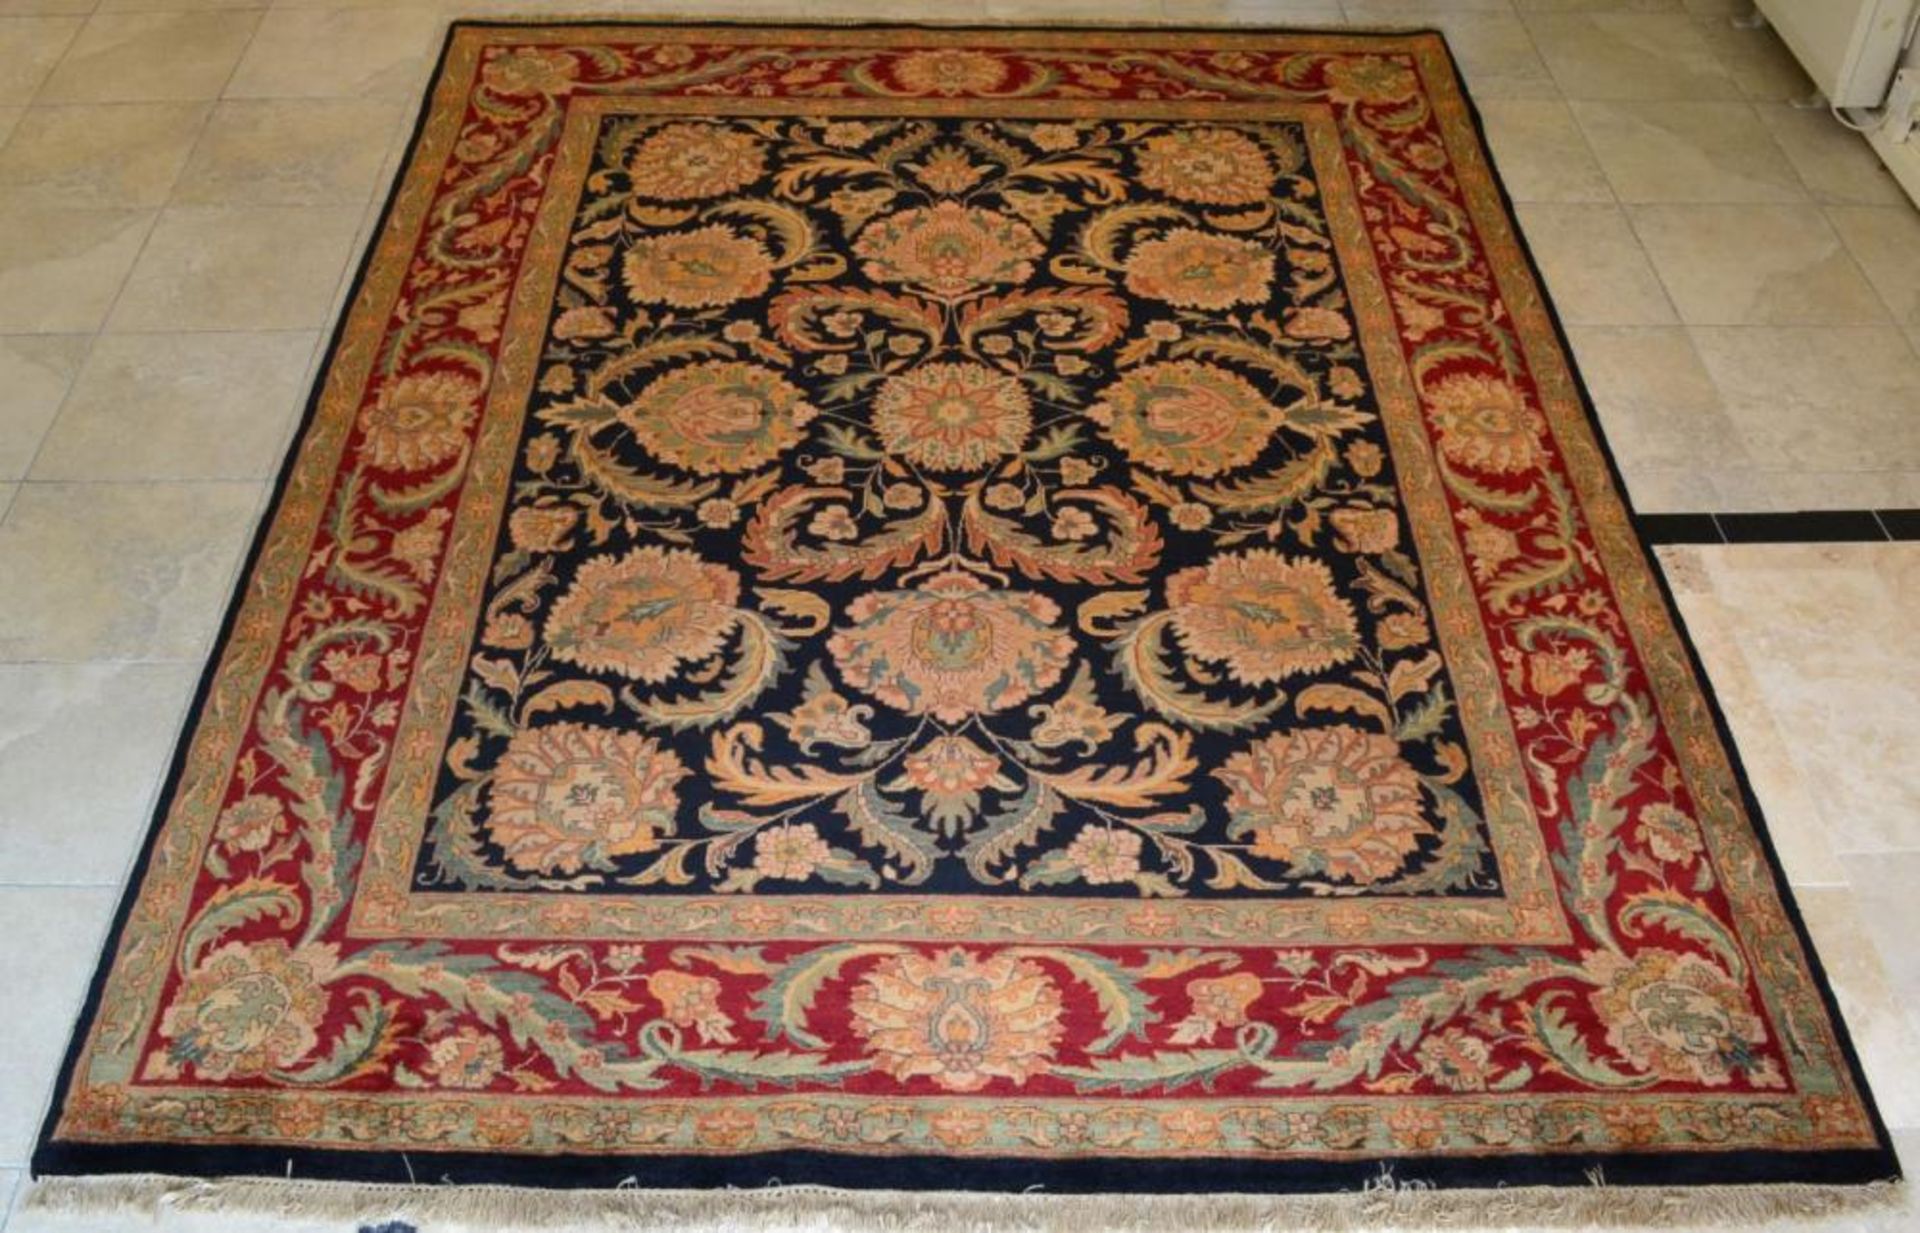 1 x Red and Black Jaipur Handknotted Carpet - Handwoven In Jaipur With Handspun Wool And Vegetable - Image 6 of 16